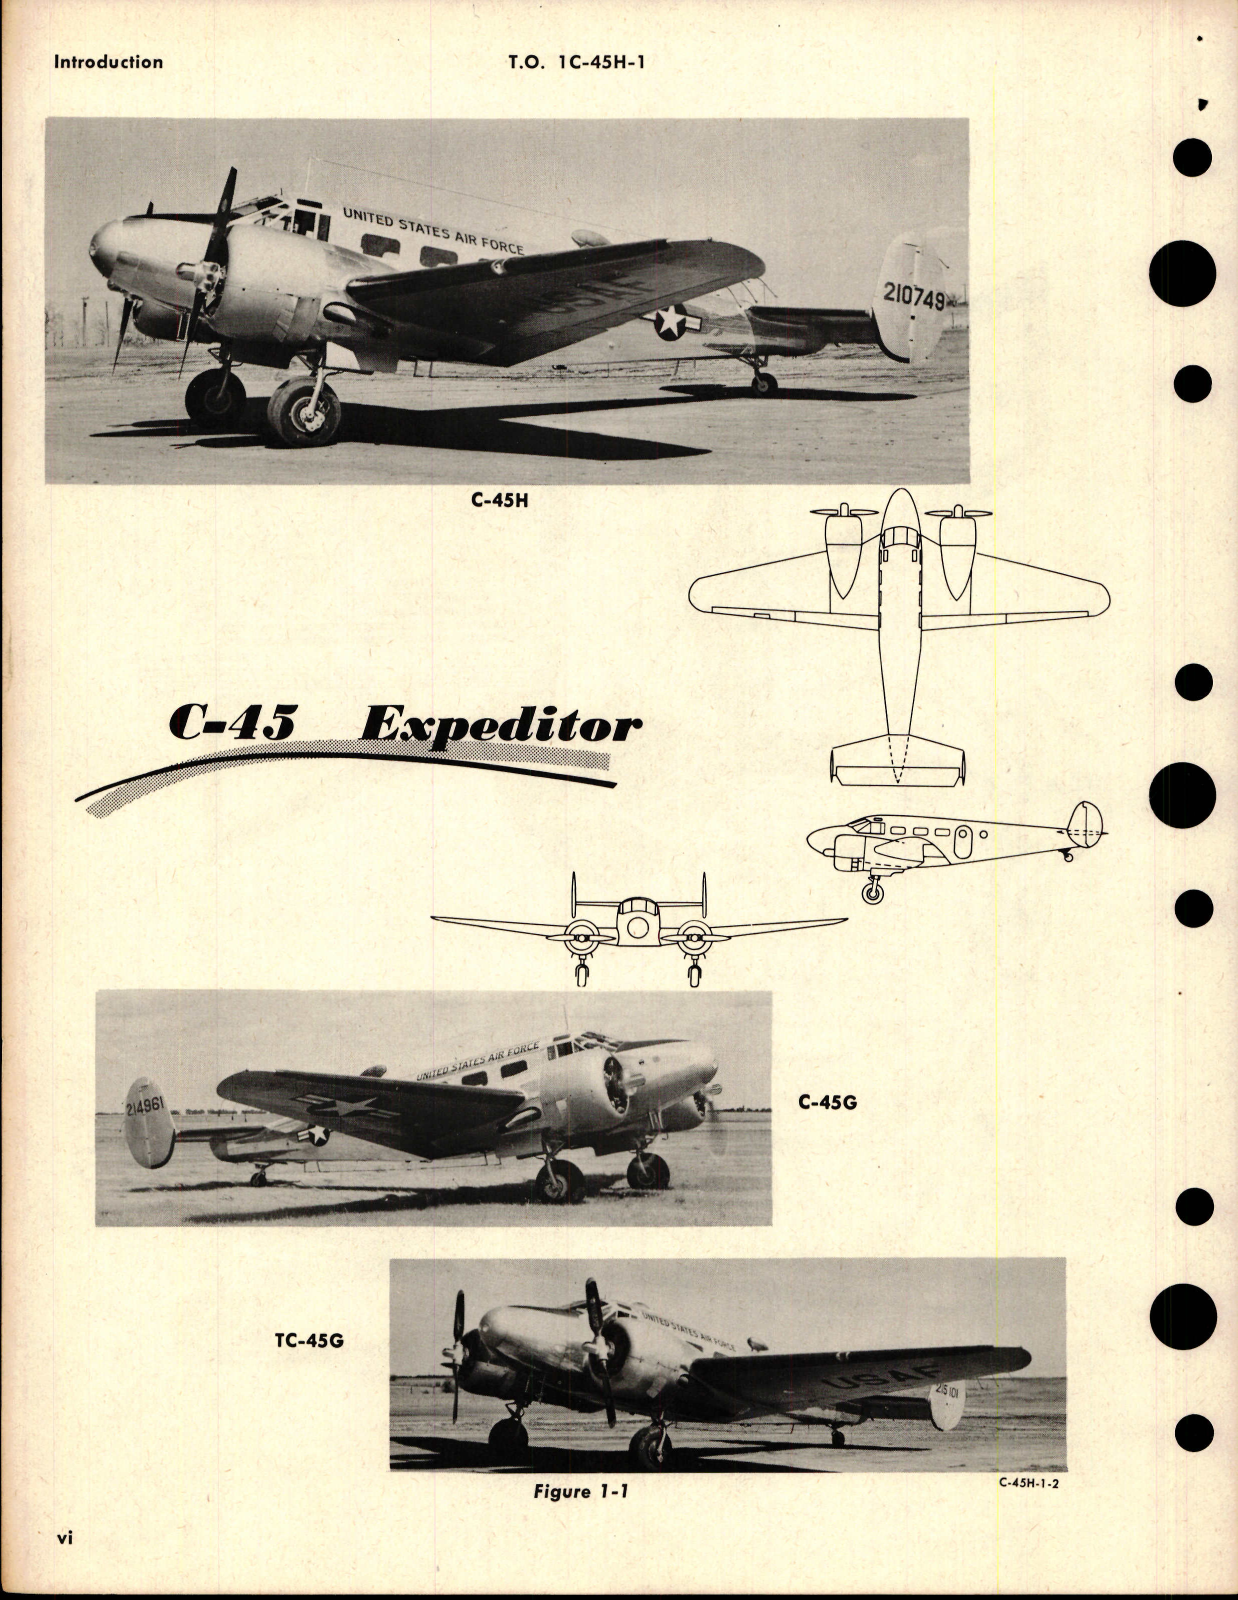 Sample page 8 from AirCorps Library document: Flight Handbook for C-45G, TC-45G, and C-45H